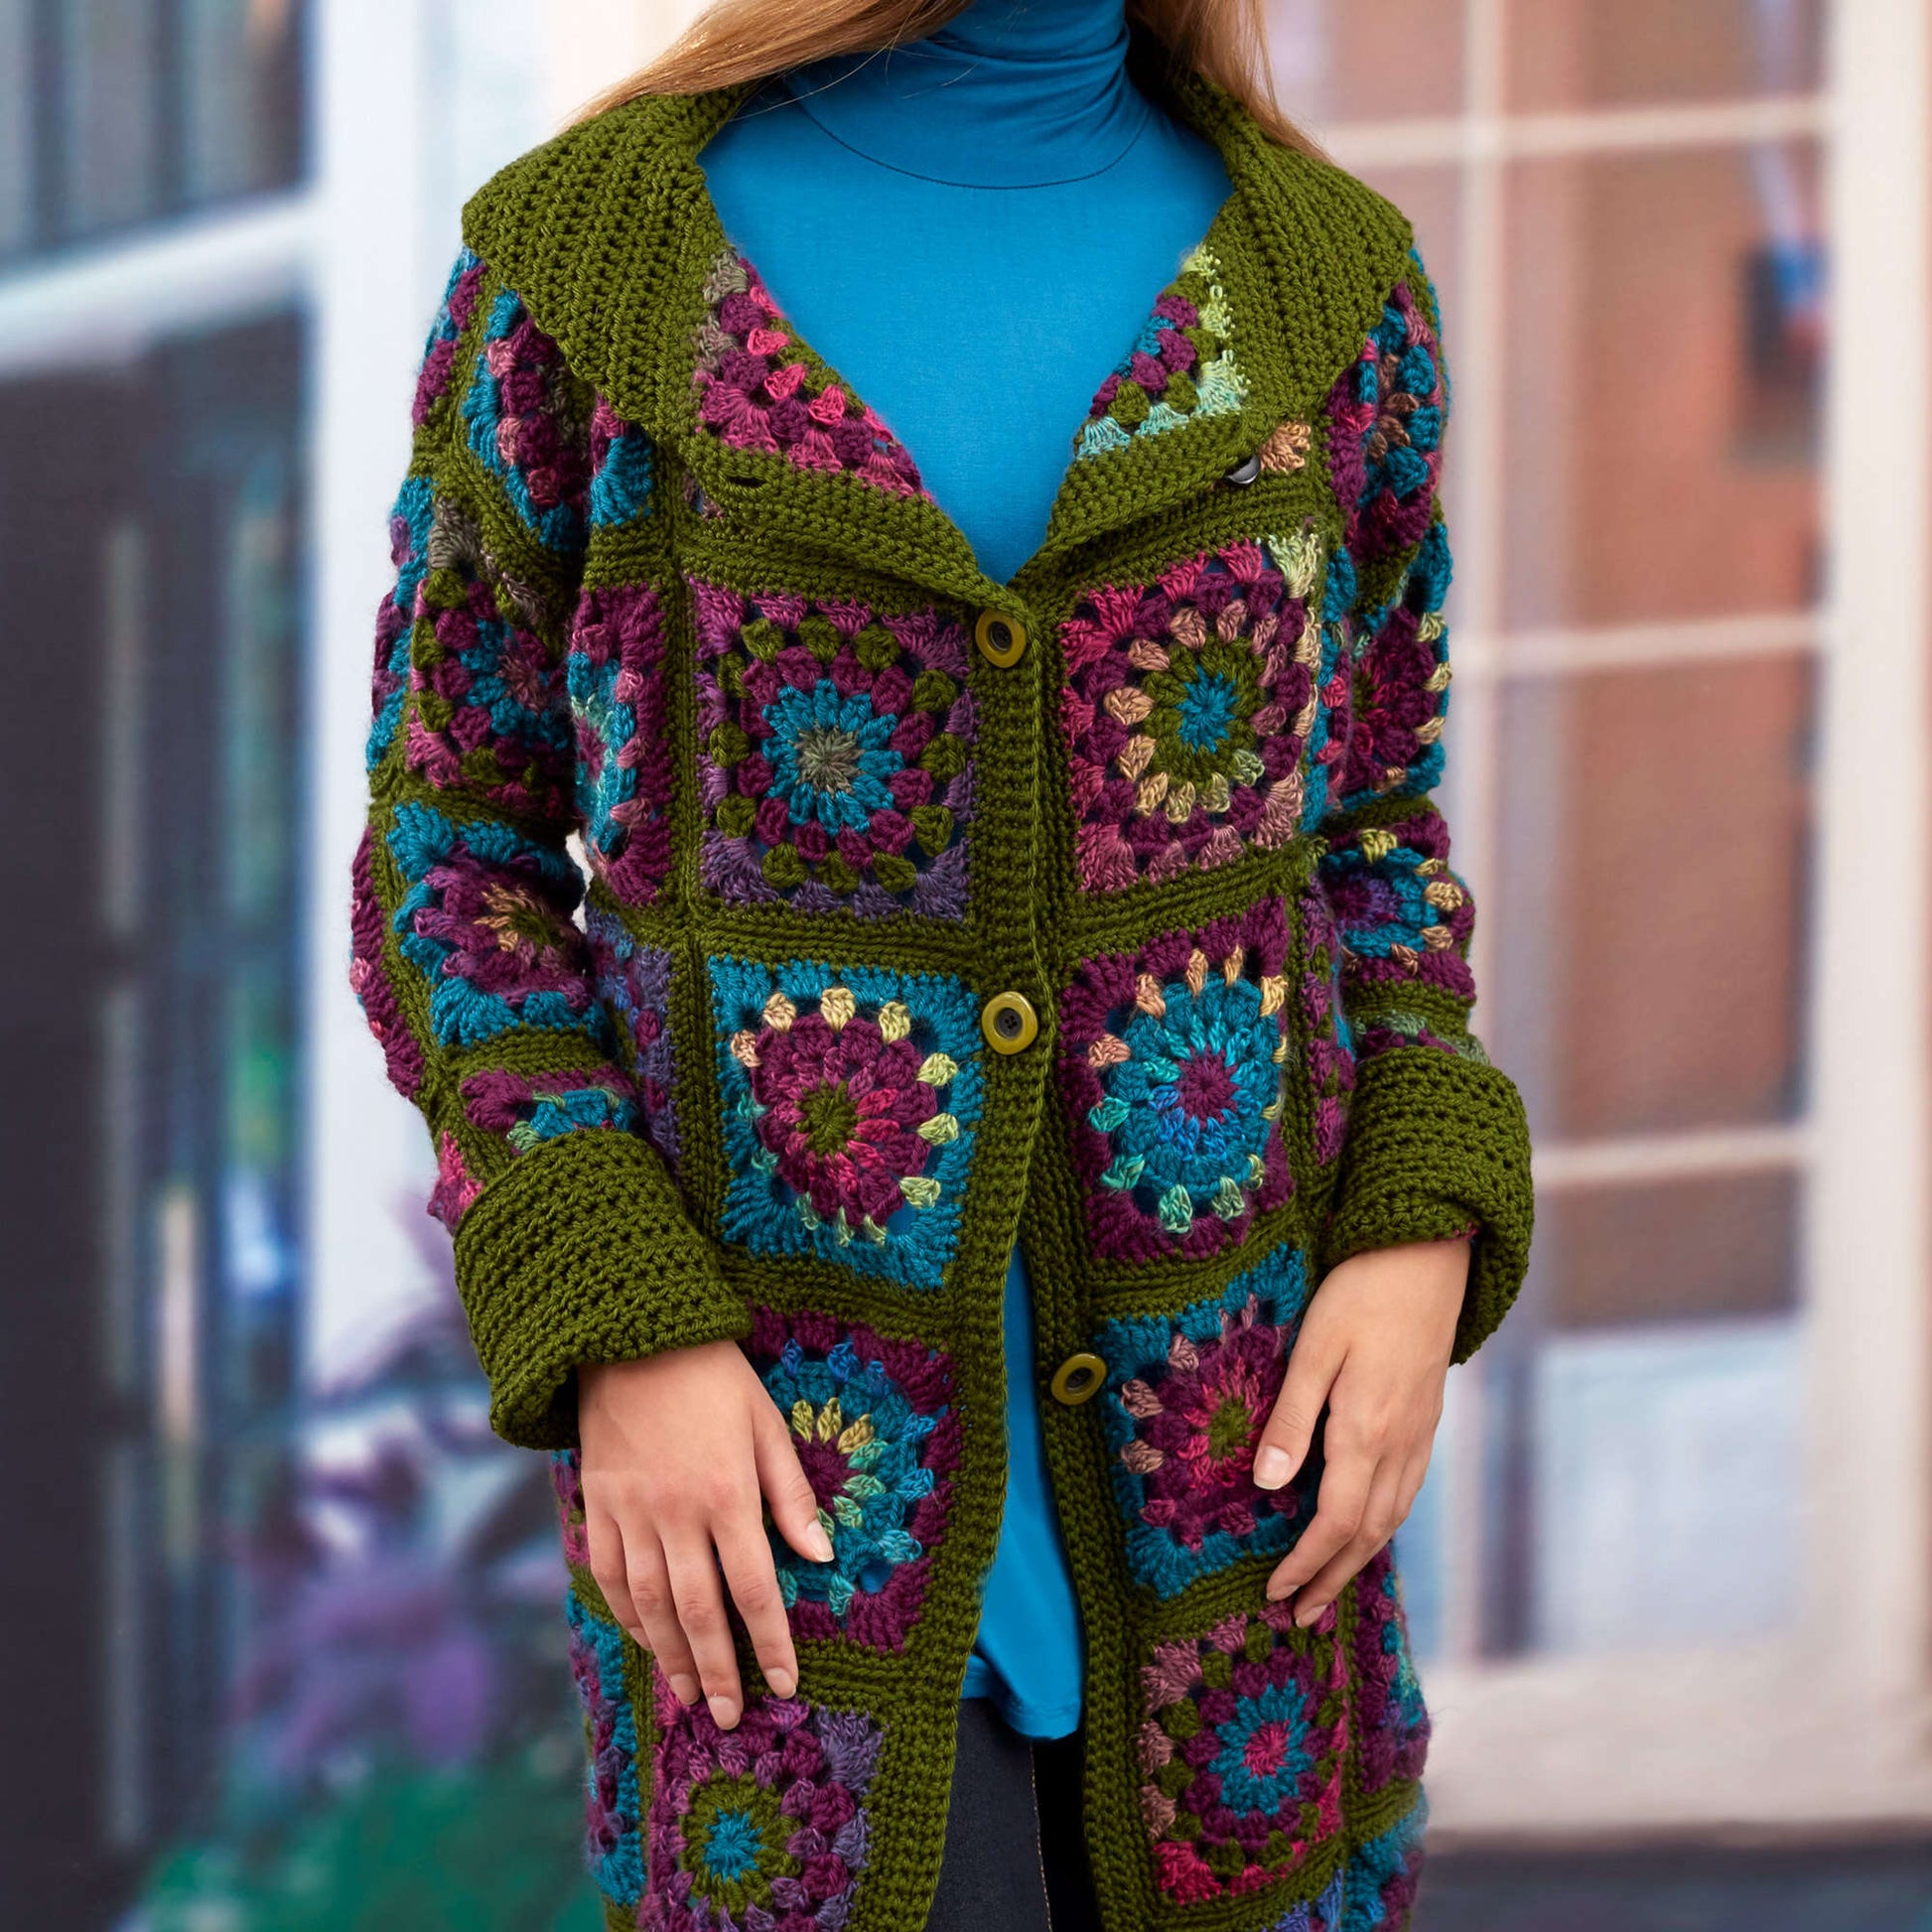 Free Red Heart Granny Square Jacket Pattern